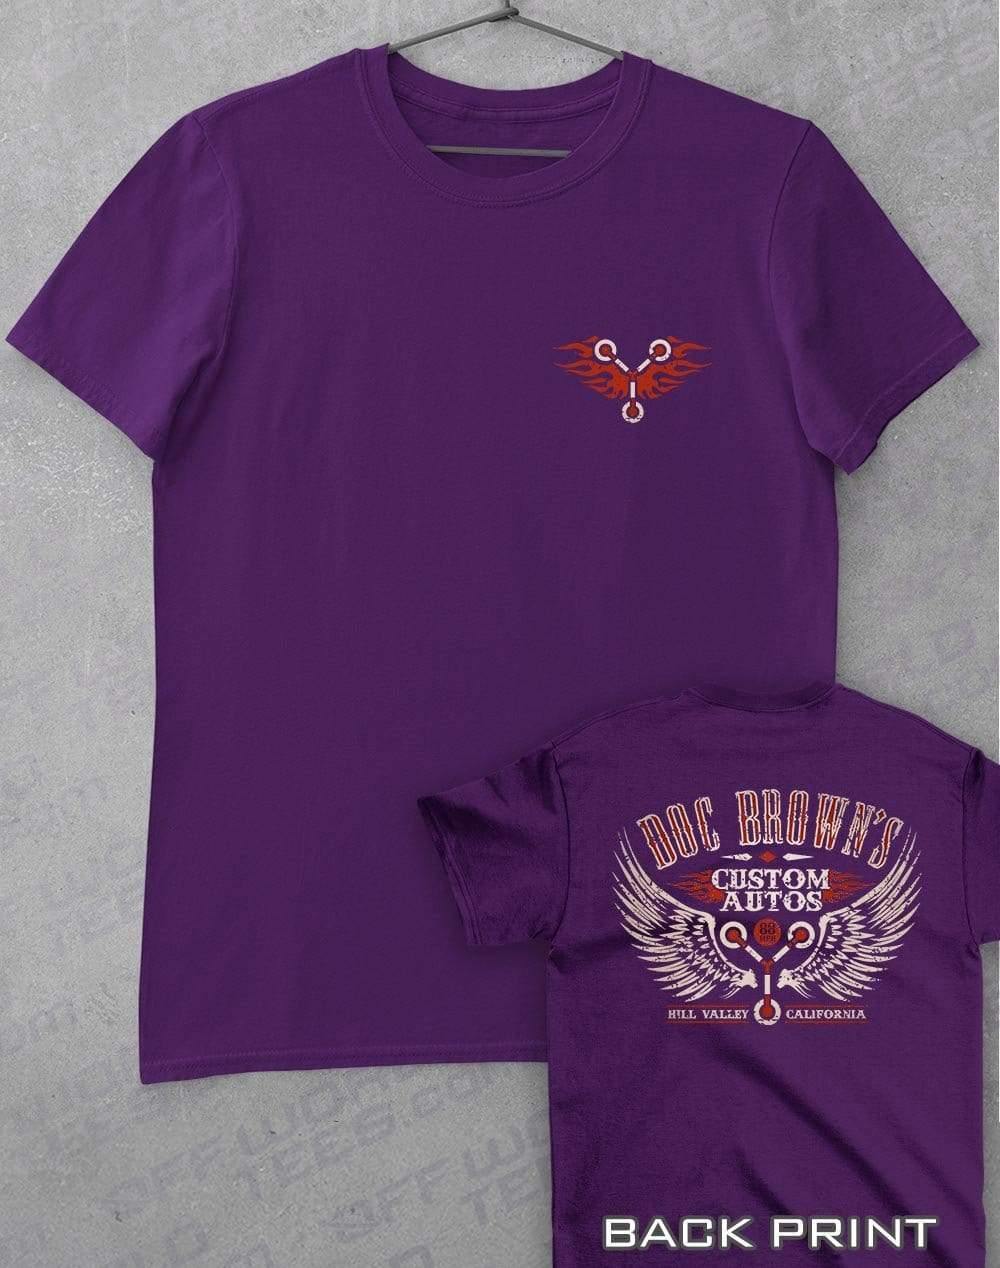 Doc Brown's Custom Autos with Back Print T-Shirt S / Purple  - Off World Tees